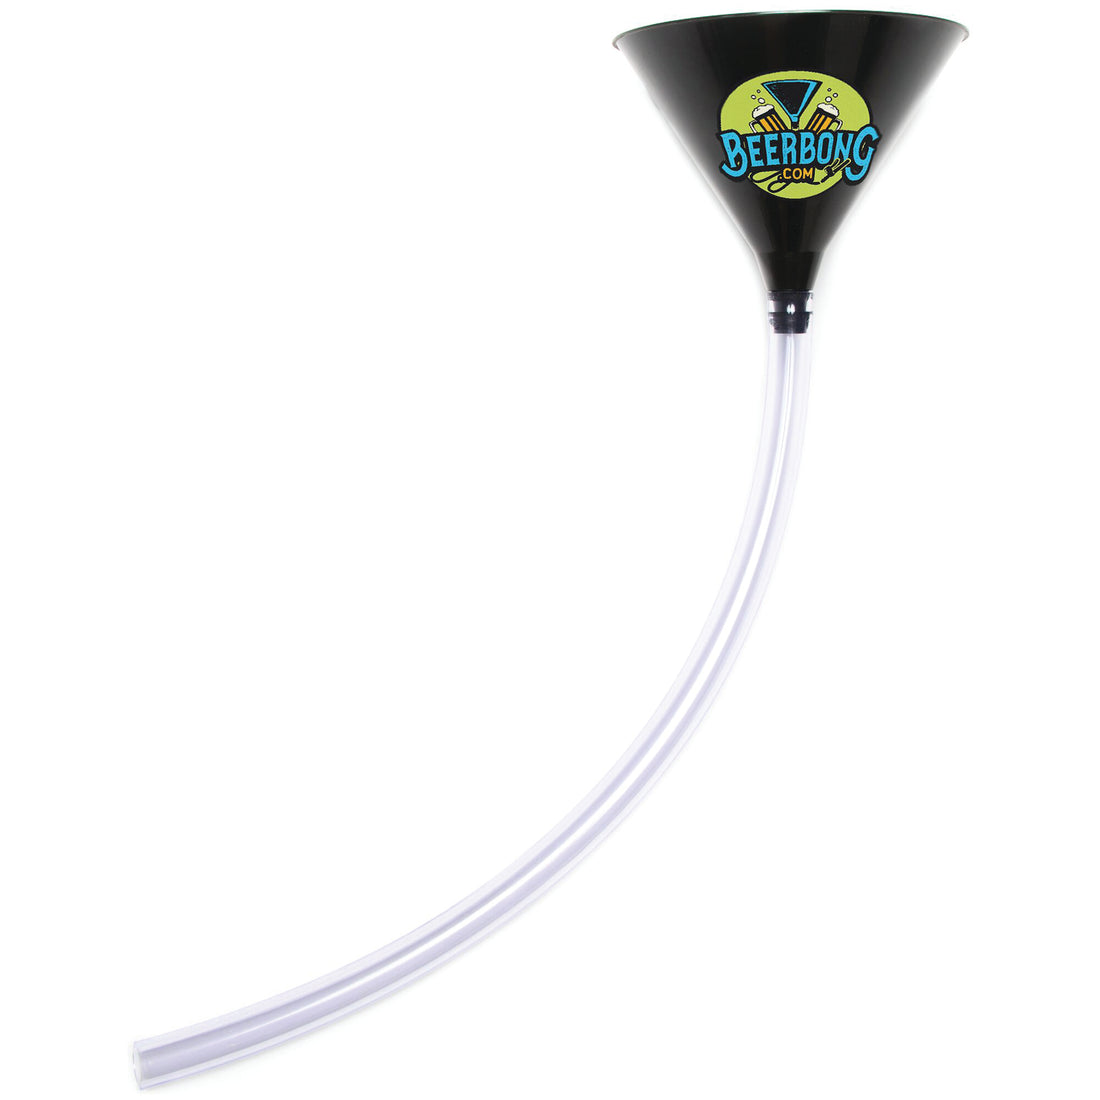 24inch Bierstick Beer Bong Tube and Funnel with Valve & Y-Adapter